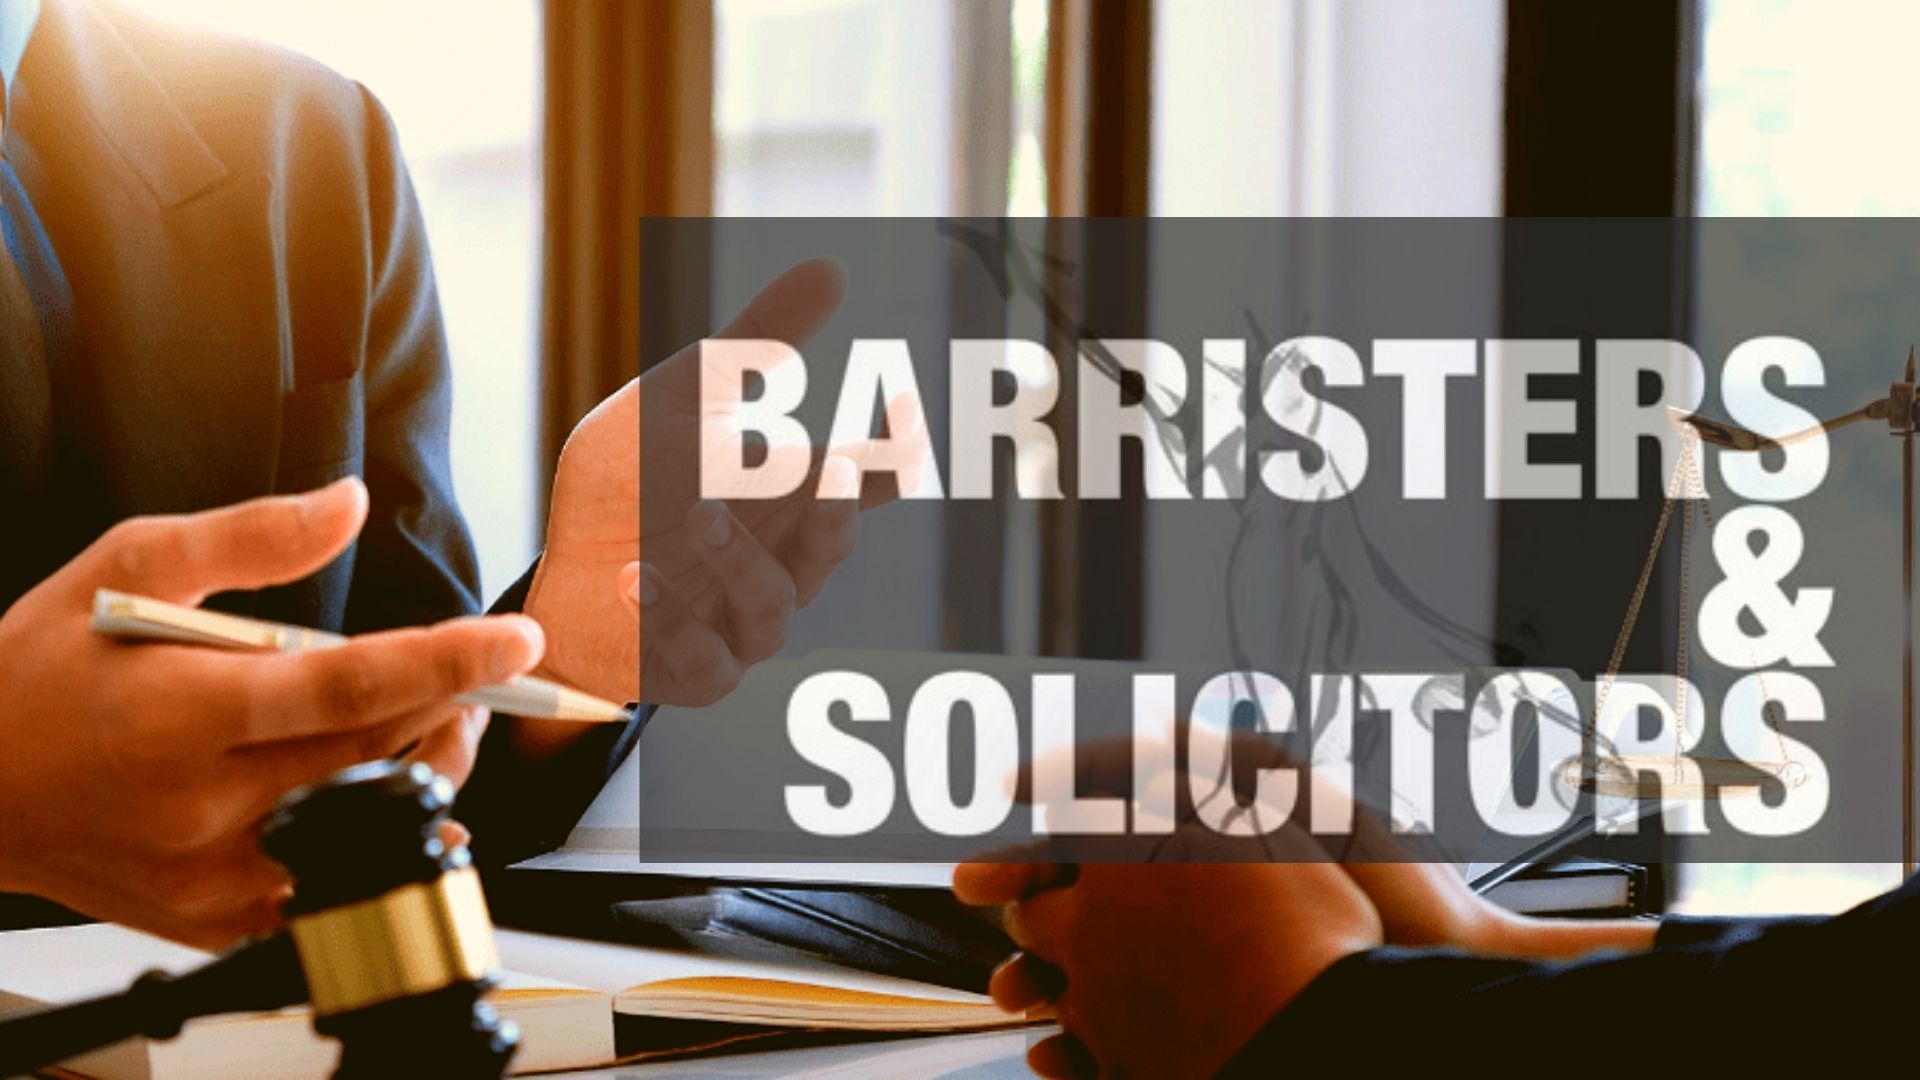 What Is Better A Barrister Or A Solicitor?